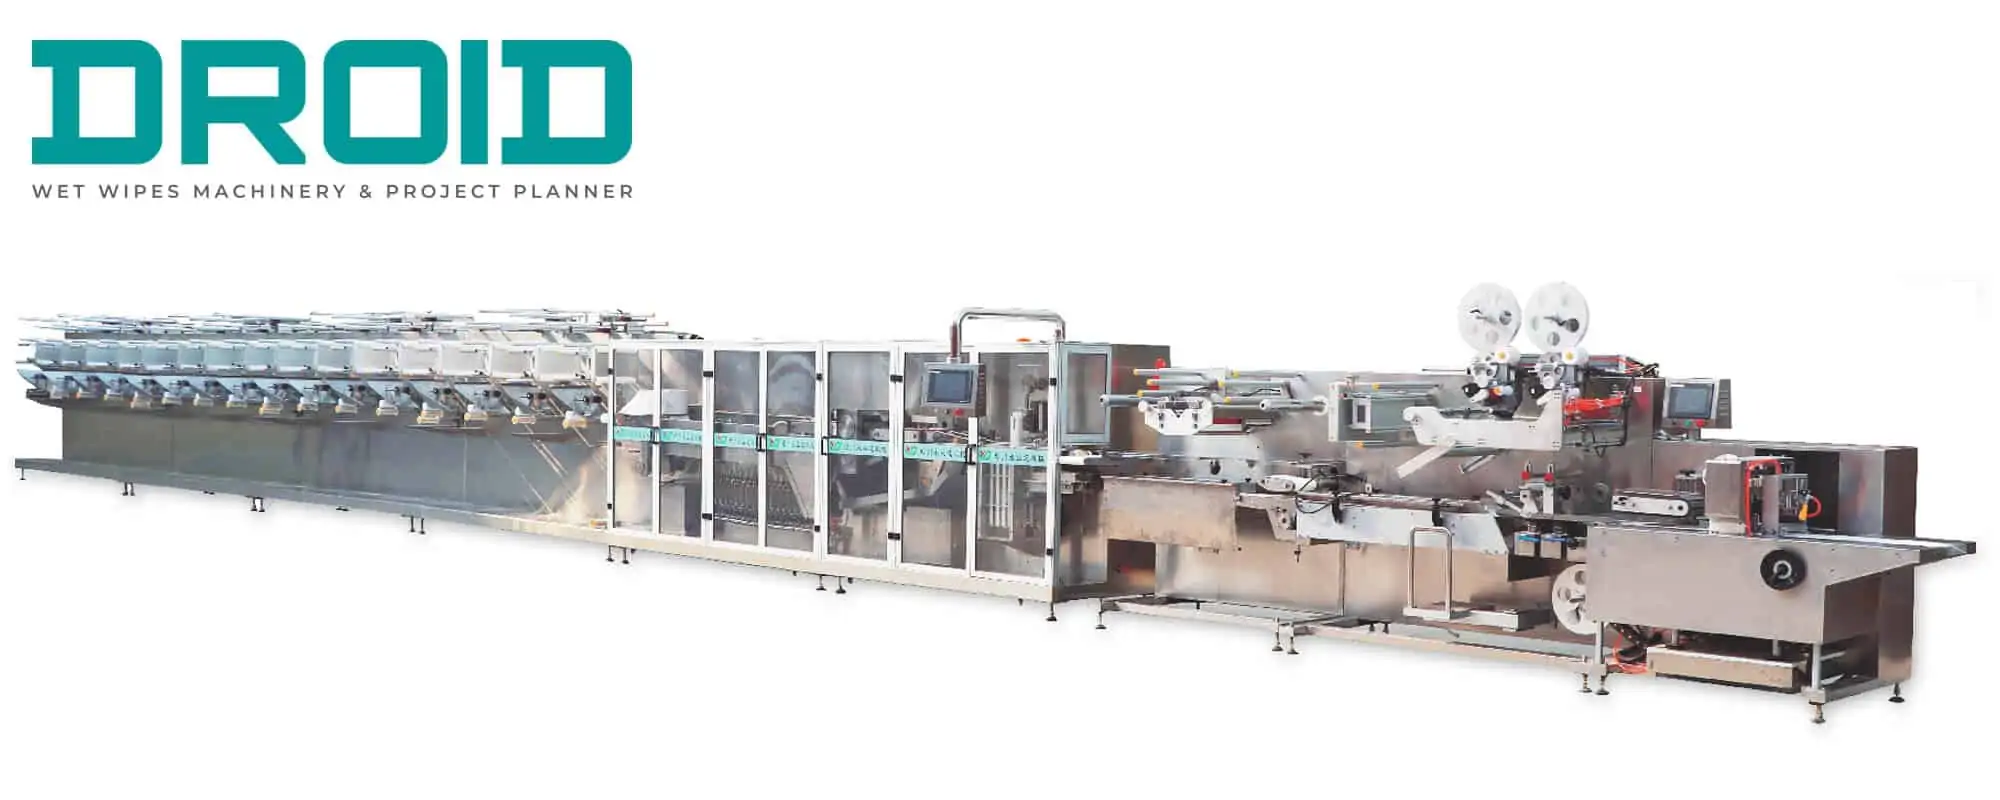 UT BM1620 Flow pack wet wipes converting machine and packaging machine - Are you looking for Disinfectant Wet Wipes Machine?